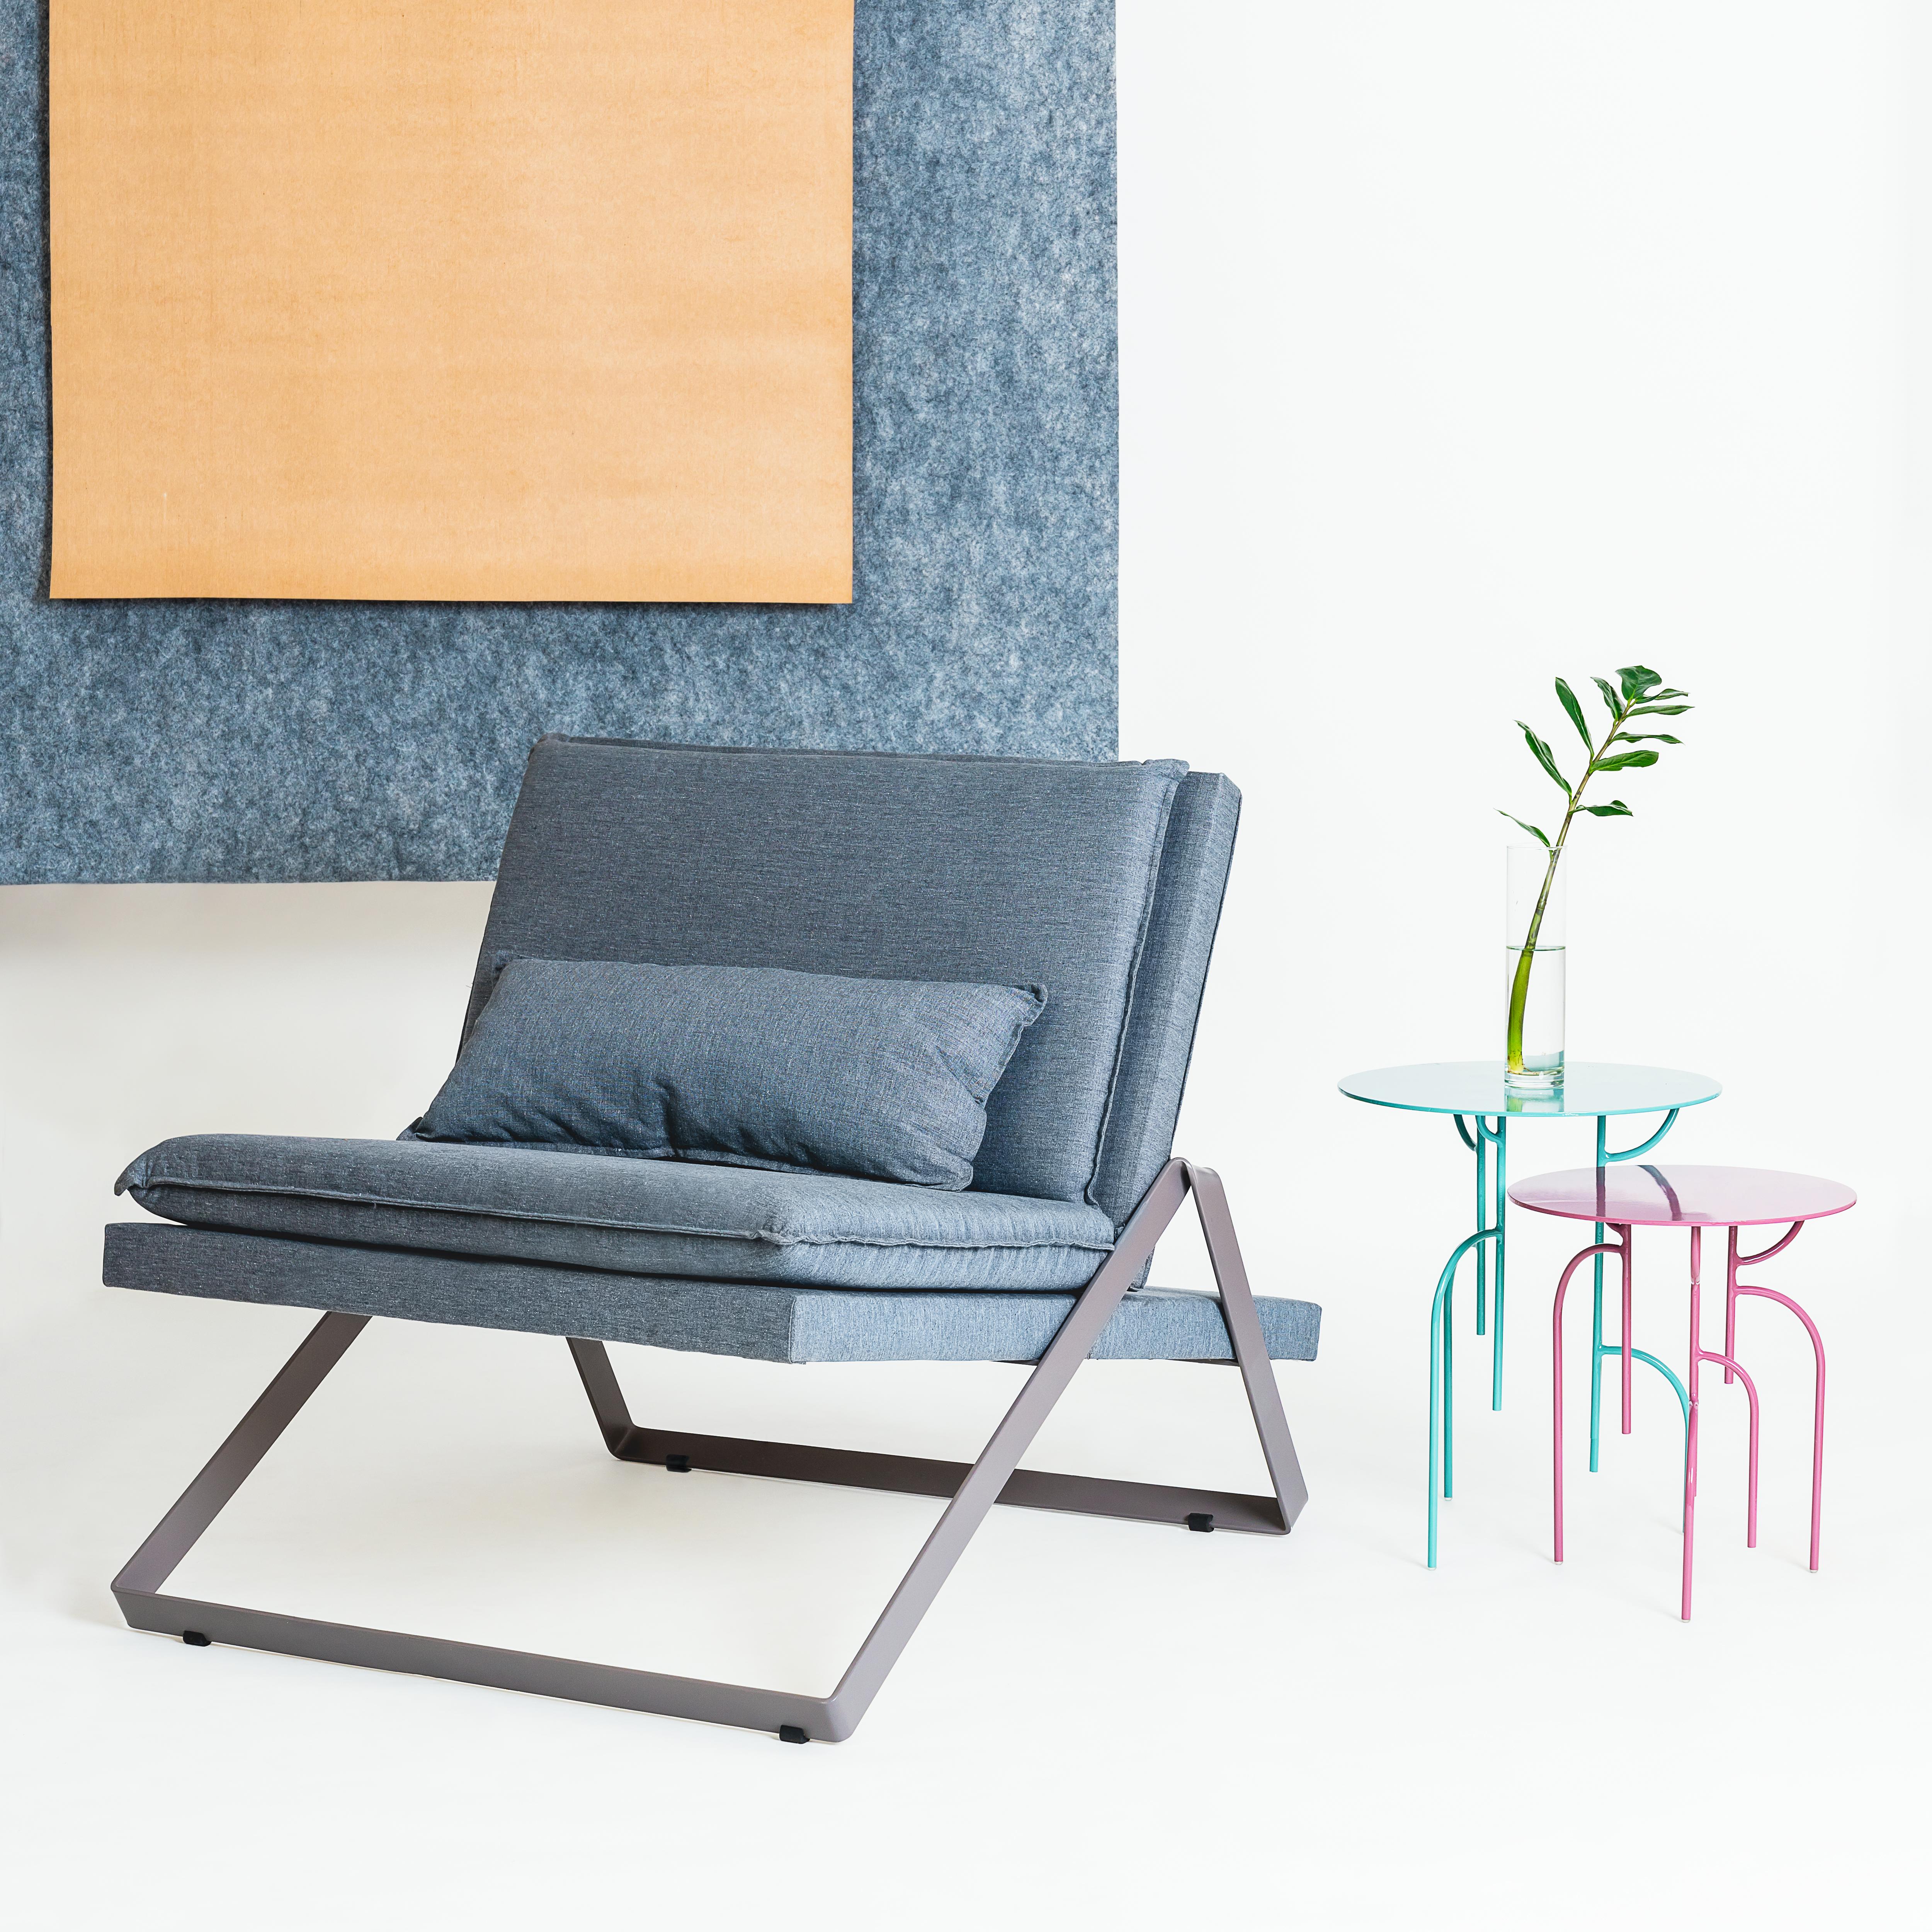 Powder-Coated Dobra Upholstered Lounge Chair in Grey Linen by Filipe Ramos For Sale